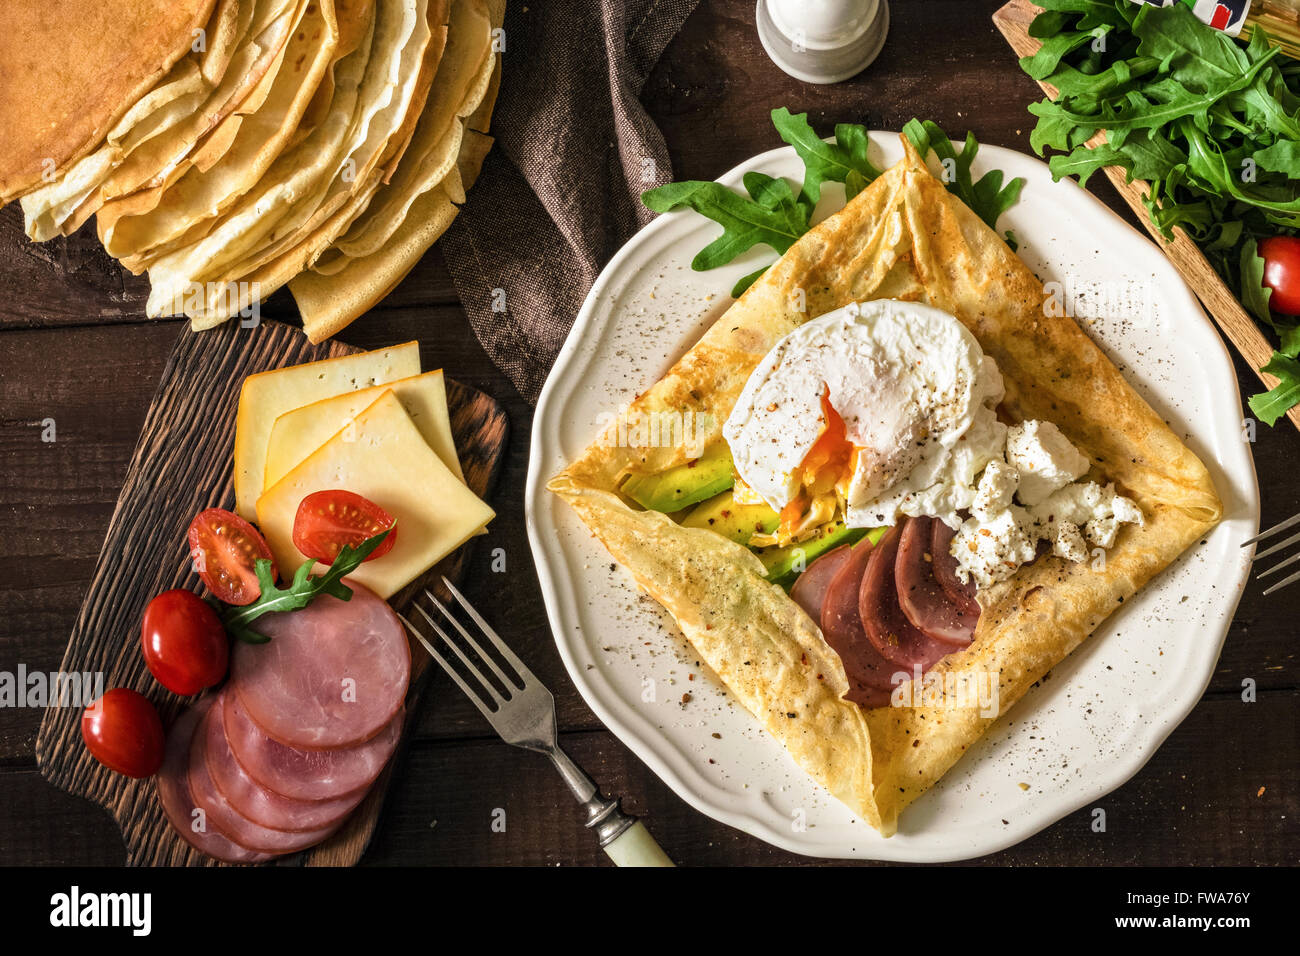 Crepe galette with meat, avocado, soft white cheese and poached egg on white plate Stock Photo